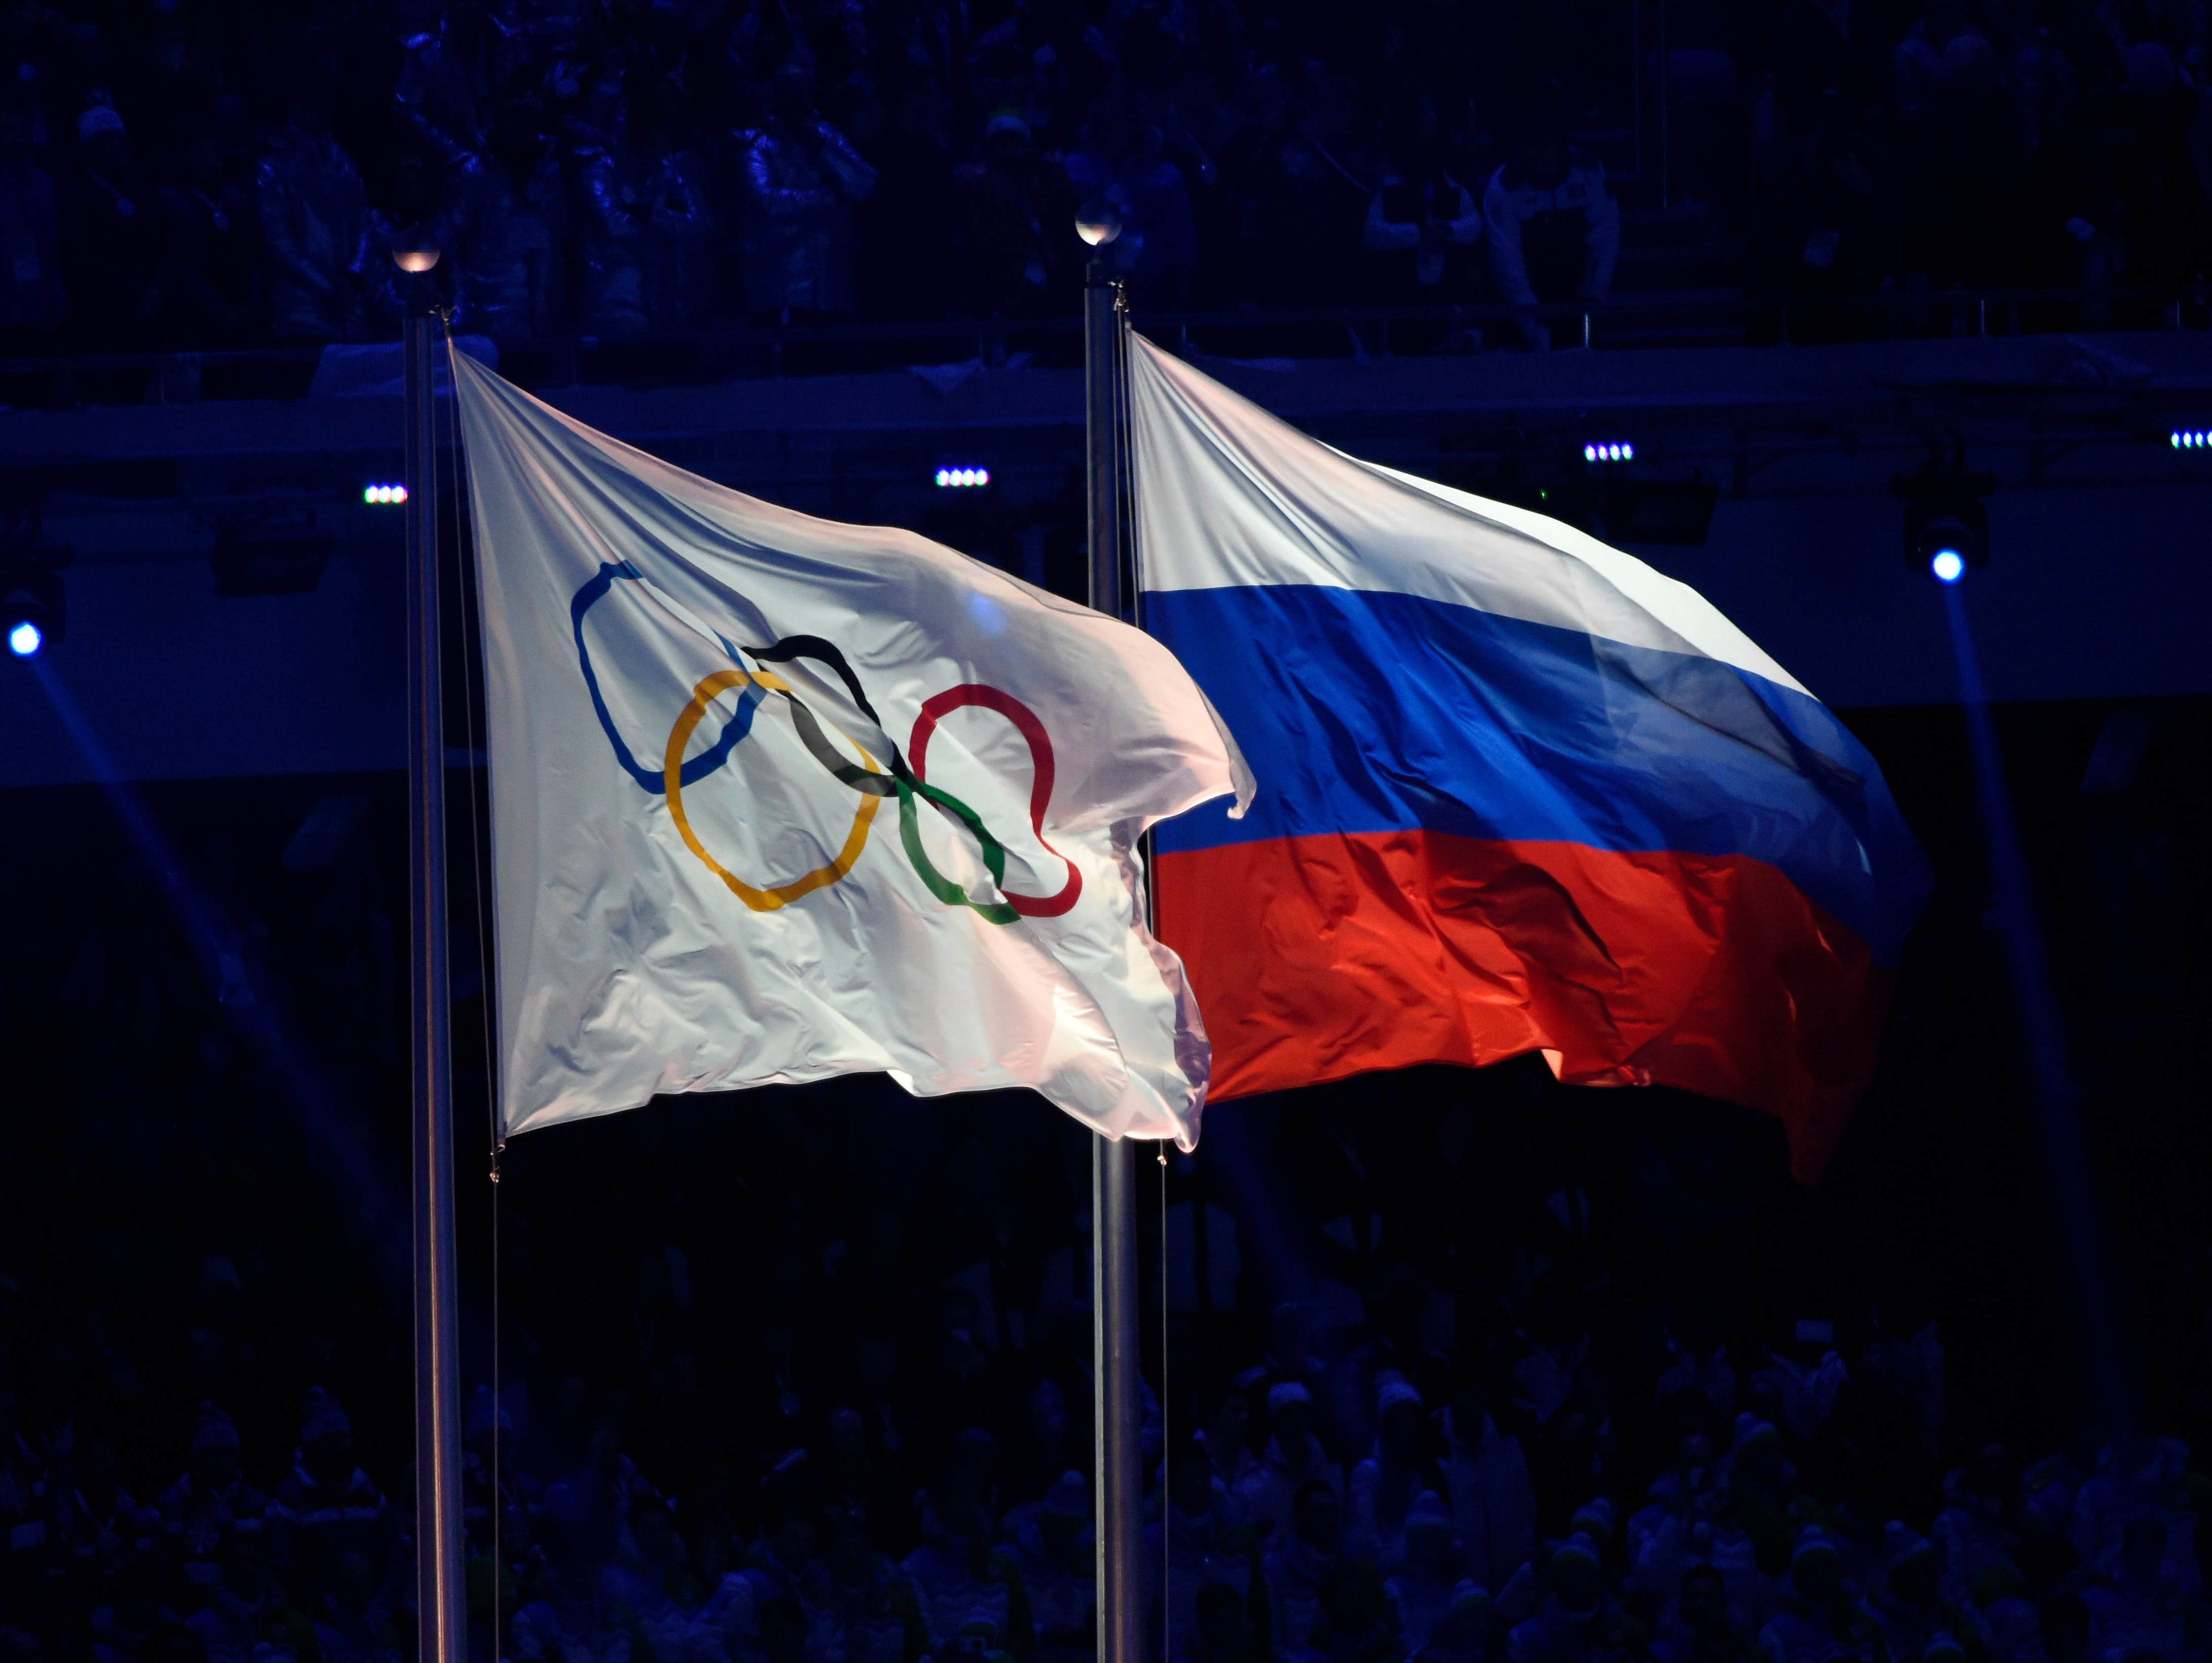 The Olympic flag (left) flies next to the Russian  flag during the opening ceremony for the Sochi 2014 Olympic Winter Games.